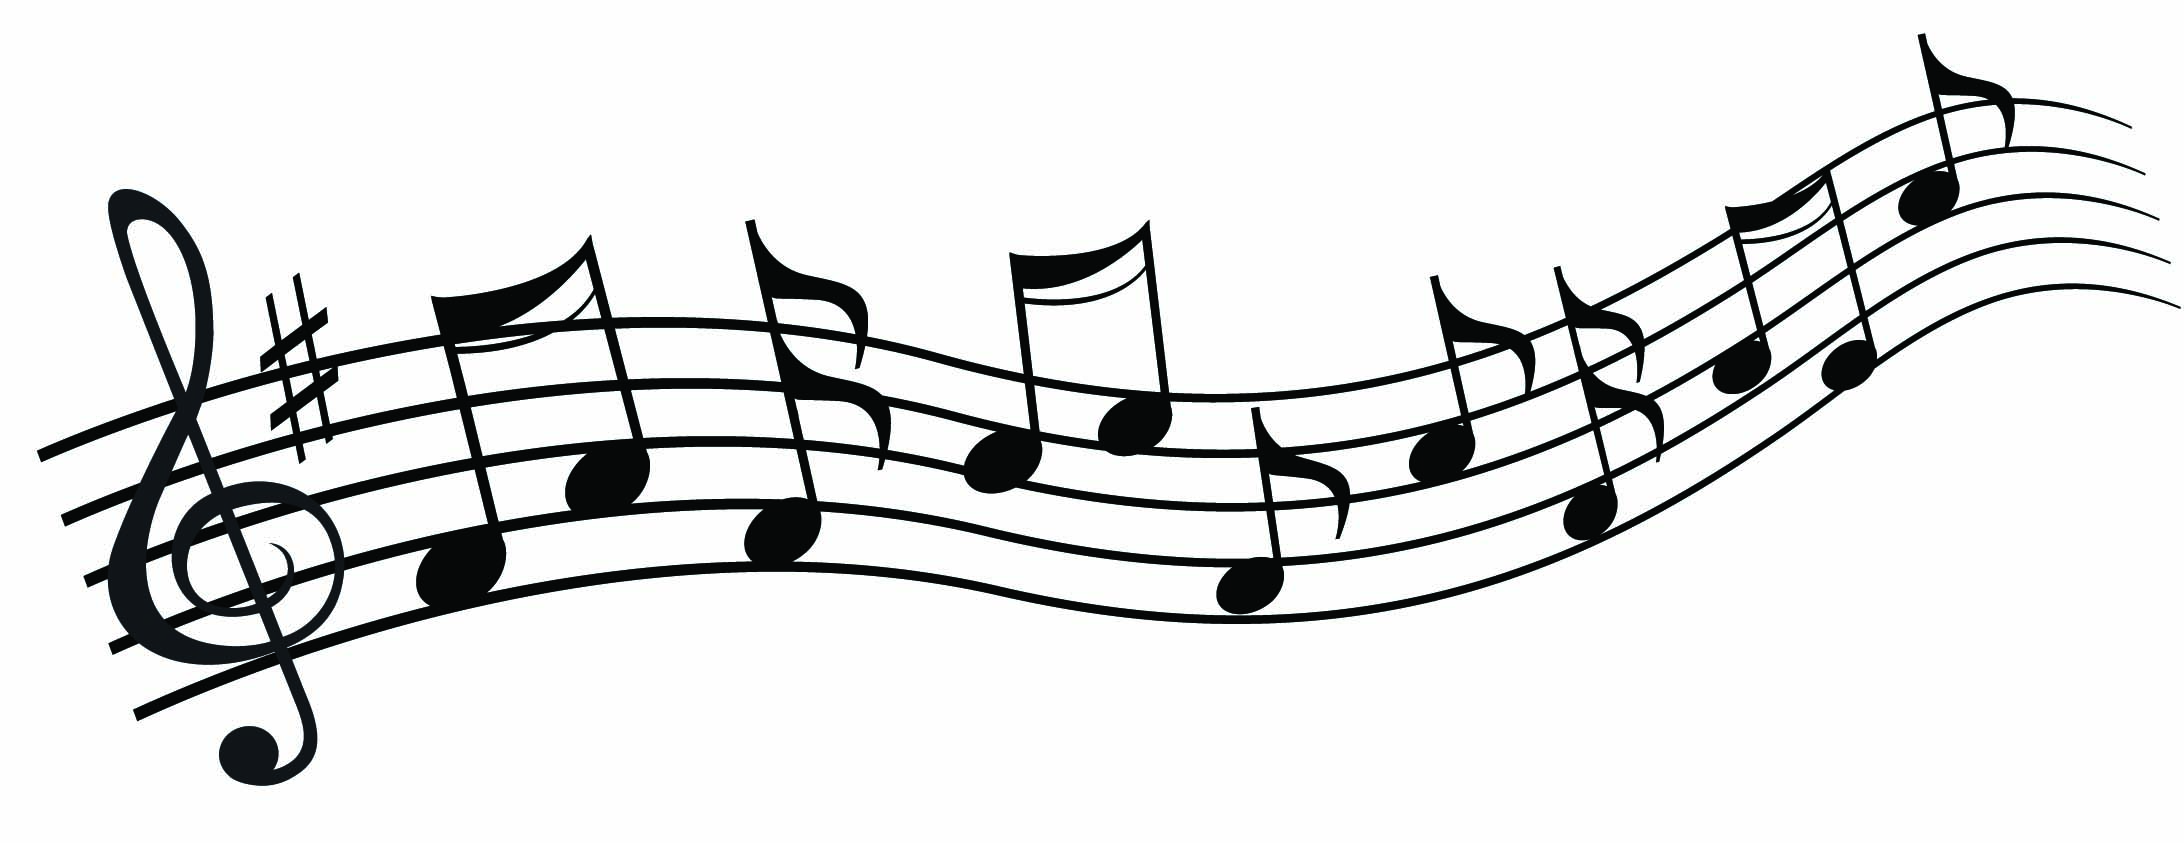 Clip art musical notes music clipart free music image image 